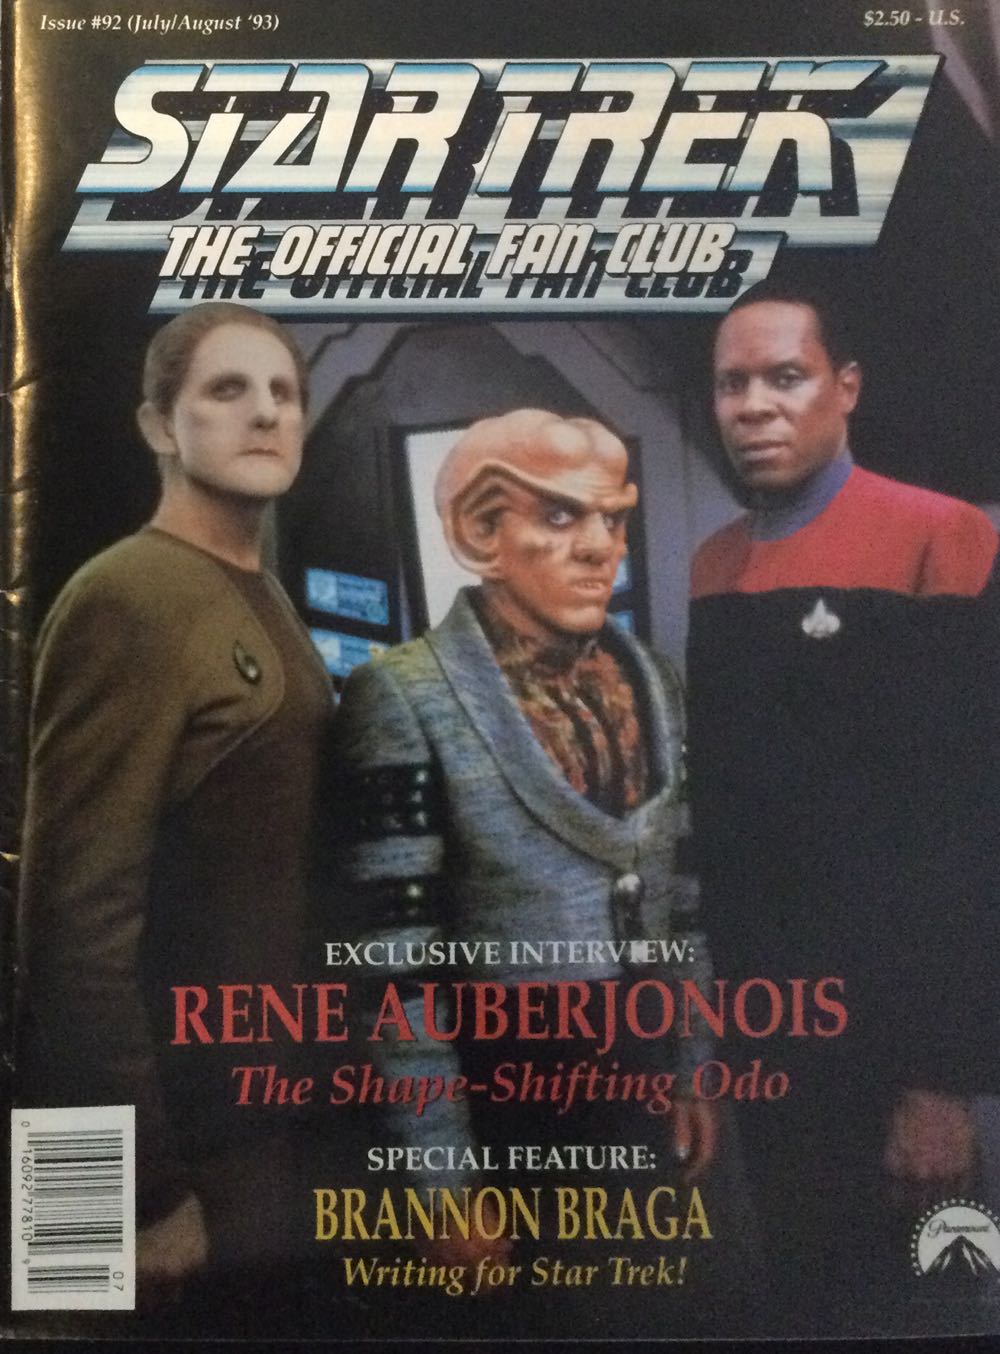 Star Trek The Official Fan Club #92  (July) magazine collectible [Barcode 01609277810921] - Main Image 1